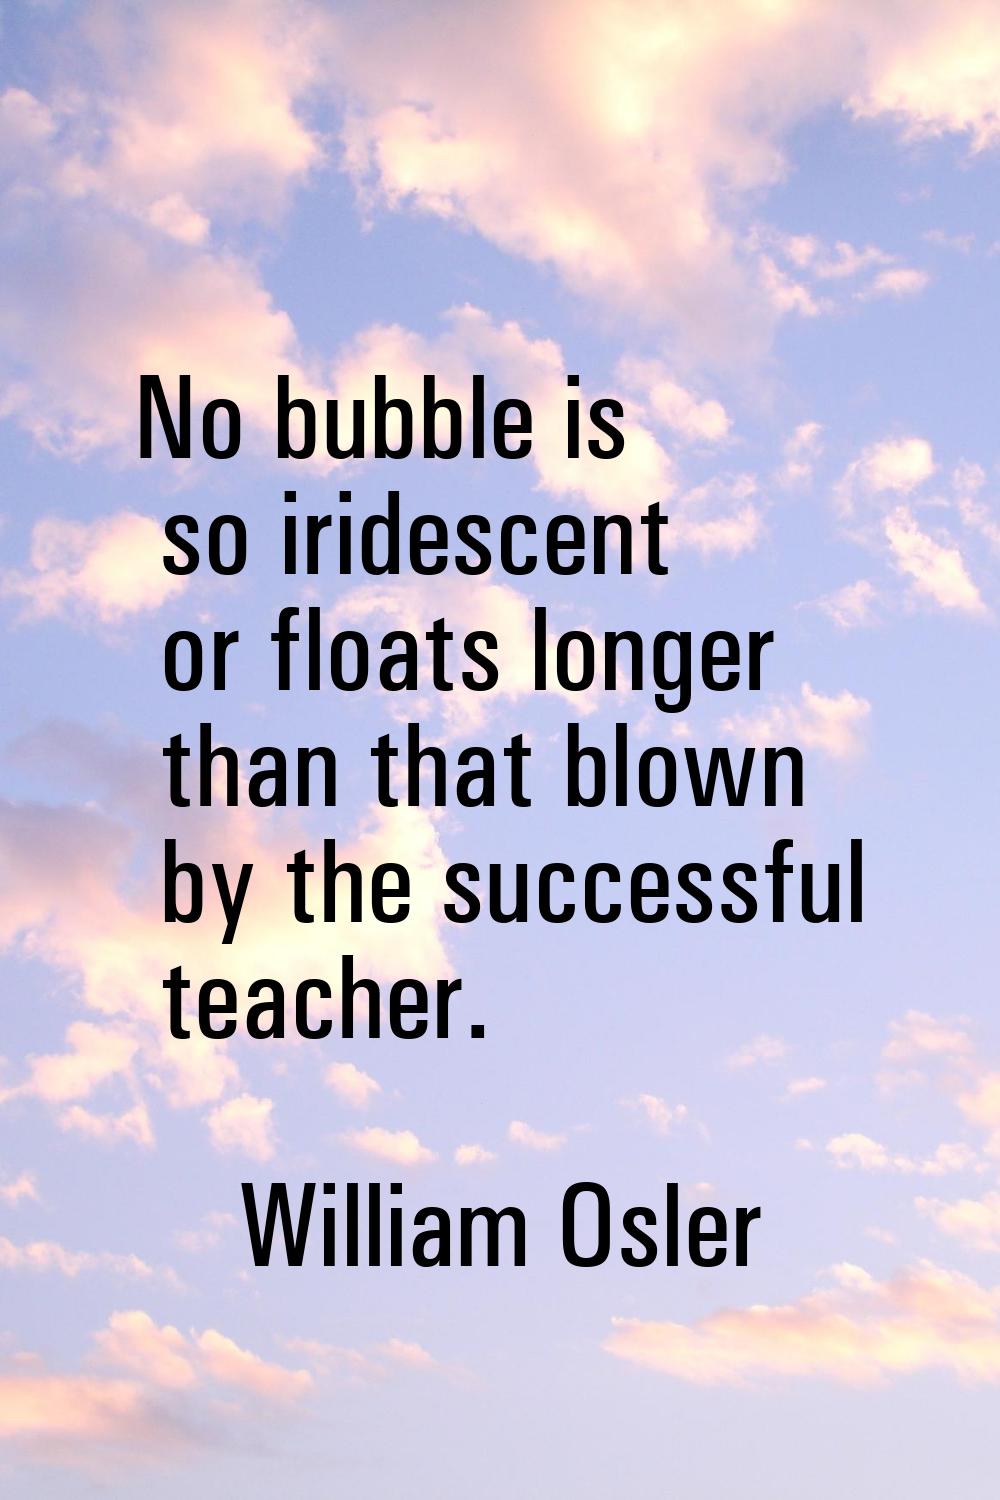 No bubble is so iridescent or floats longer than that blown by the successful teacher.